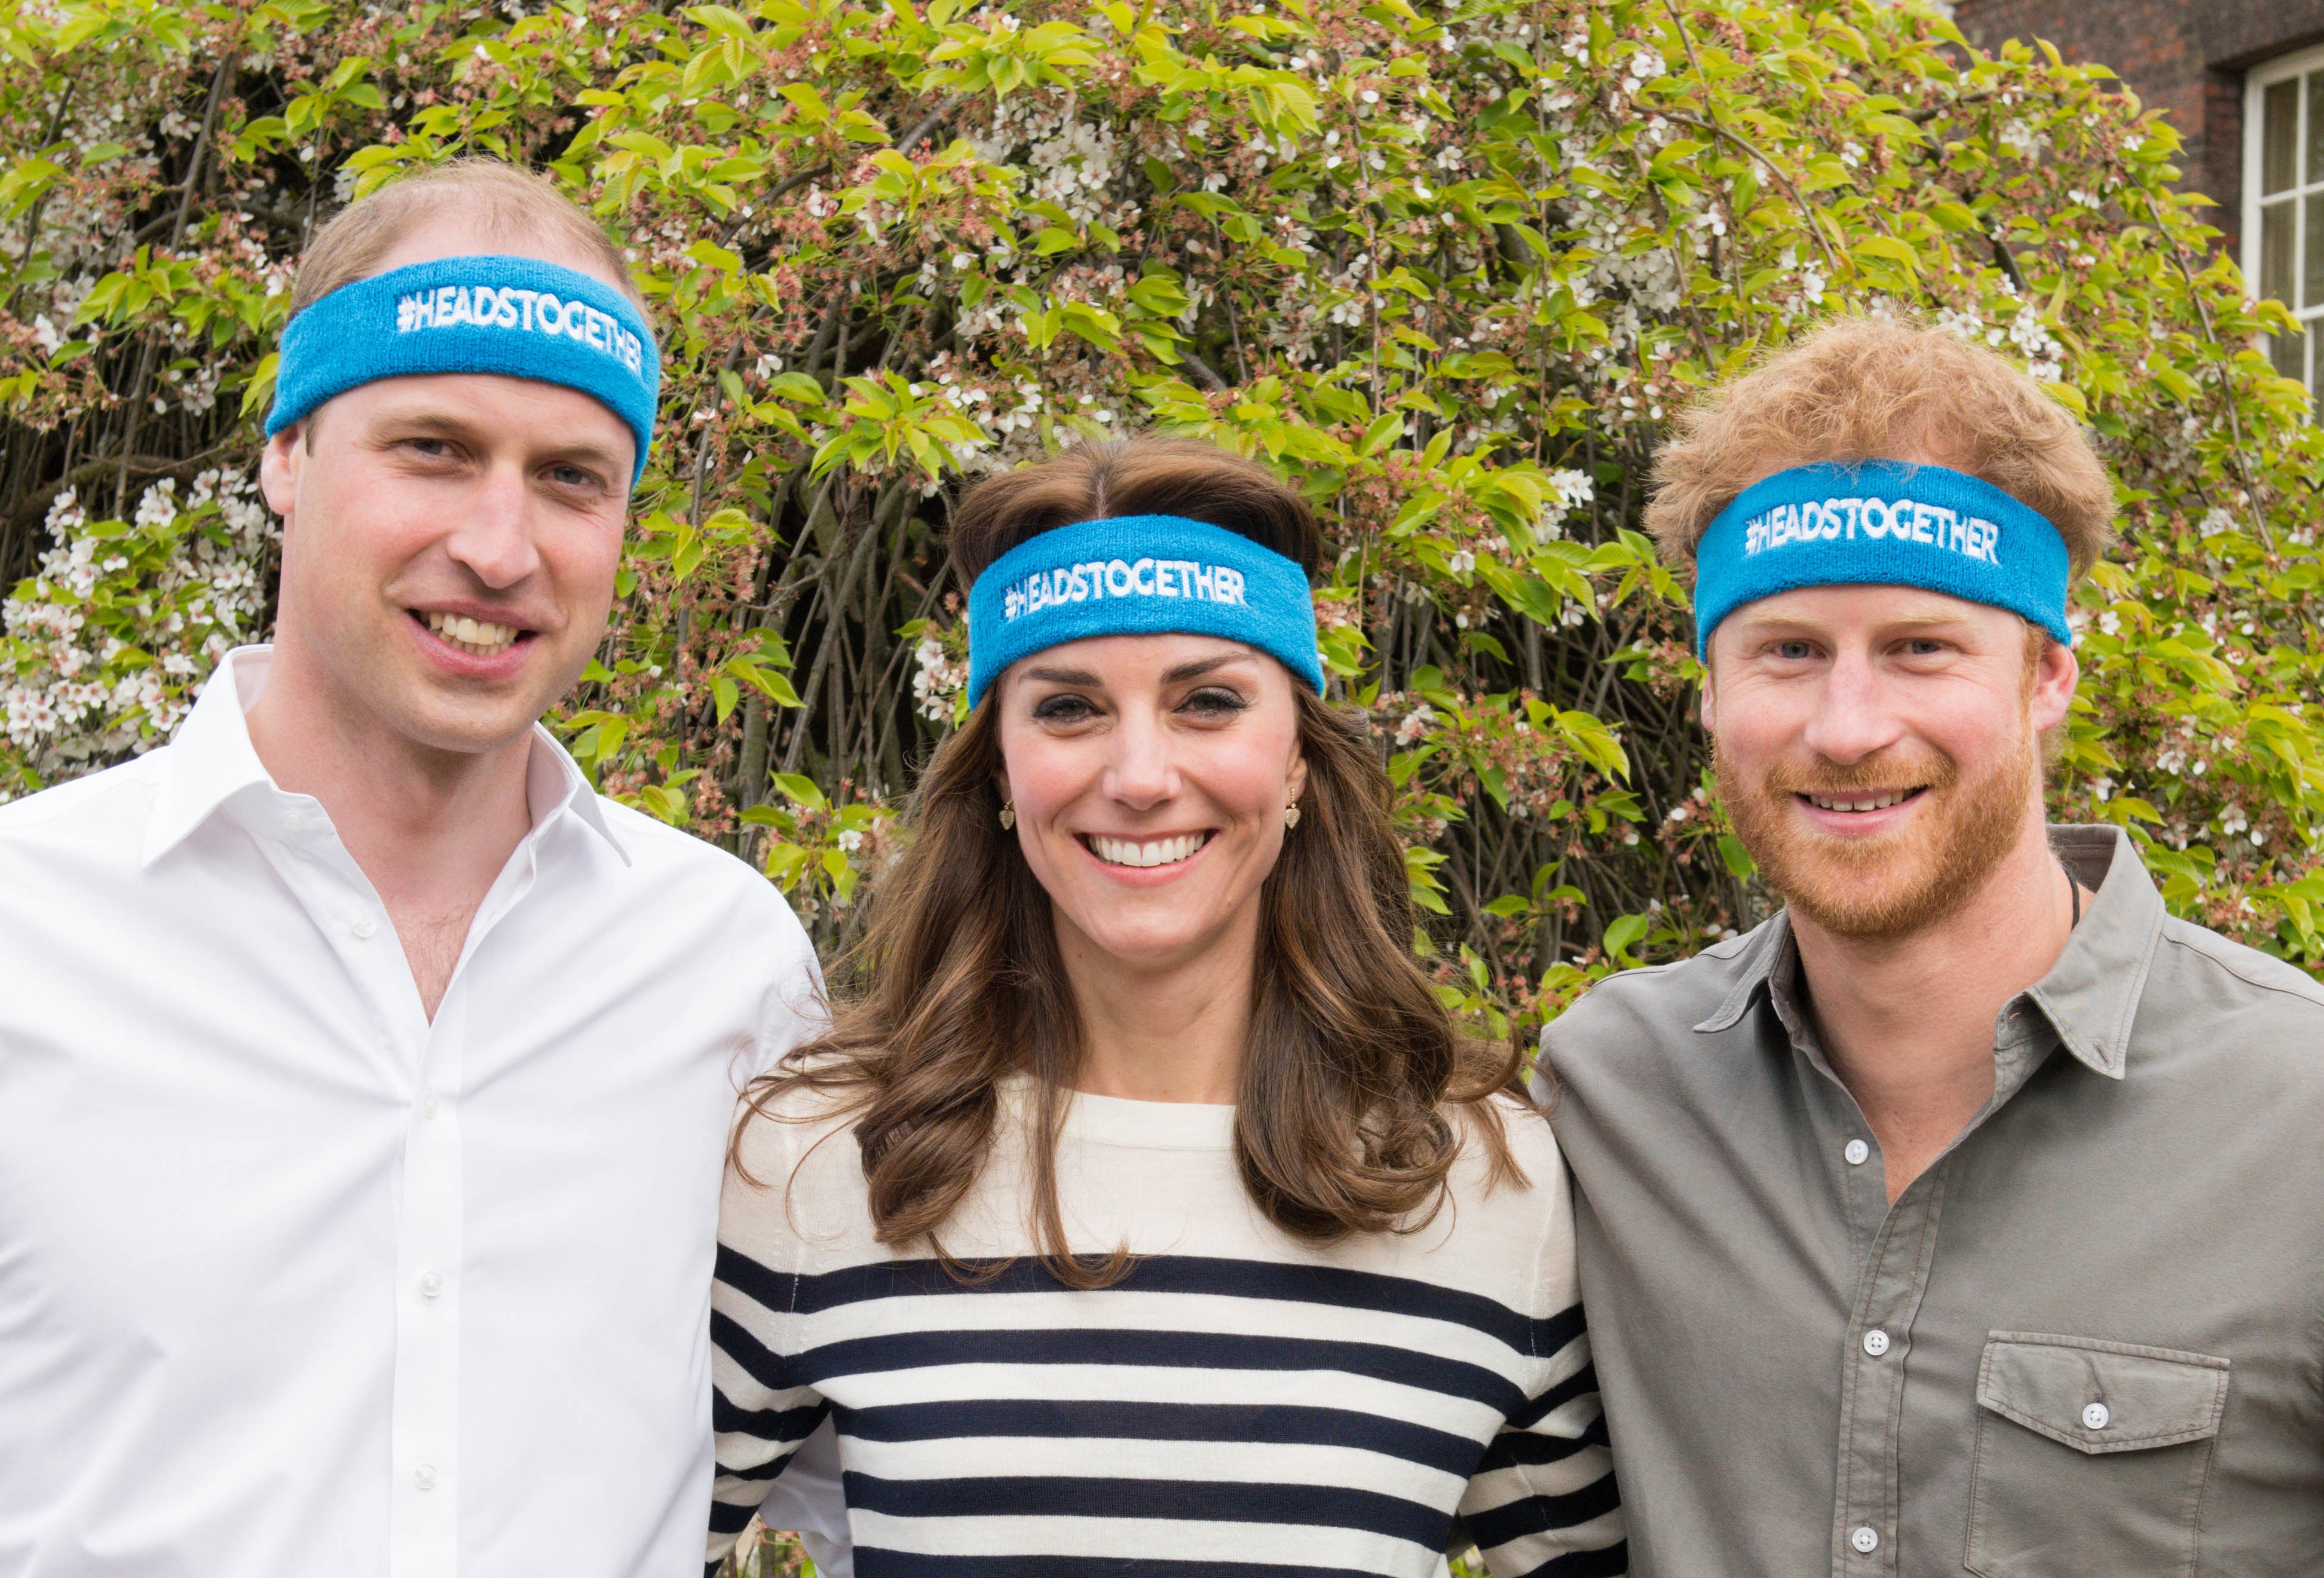 The Duke and Duchess of Cambridge and Prince Harry promoting a new campaign called Heads Together at Kensington Palace on April 21, 2016 in London, England. / Source: Getty Images